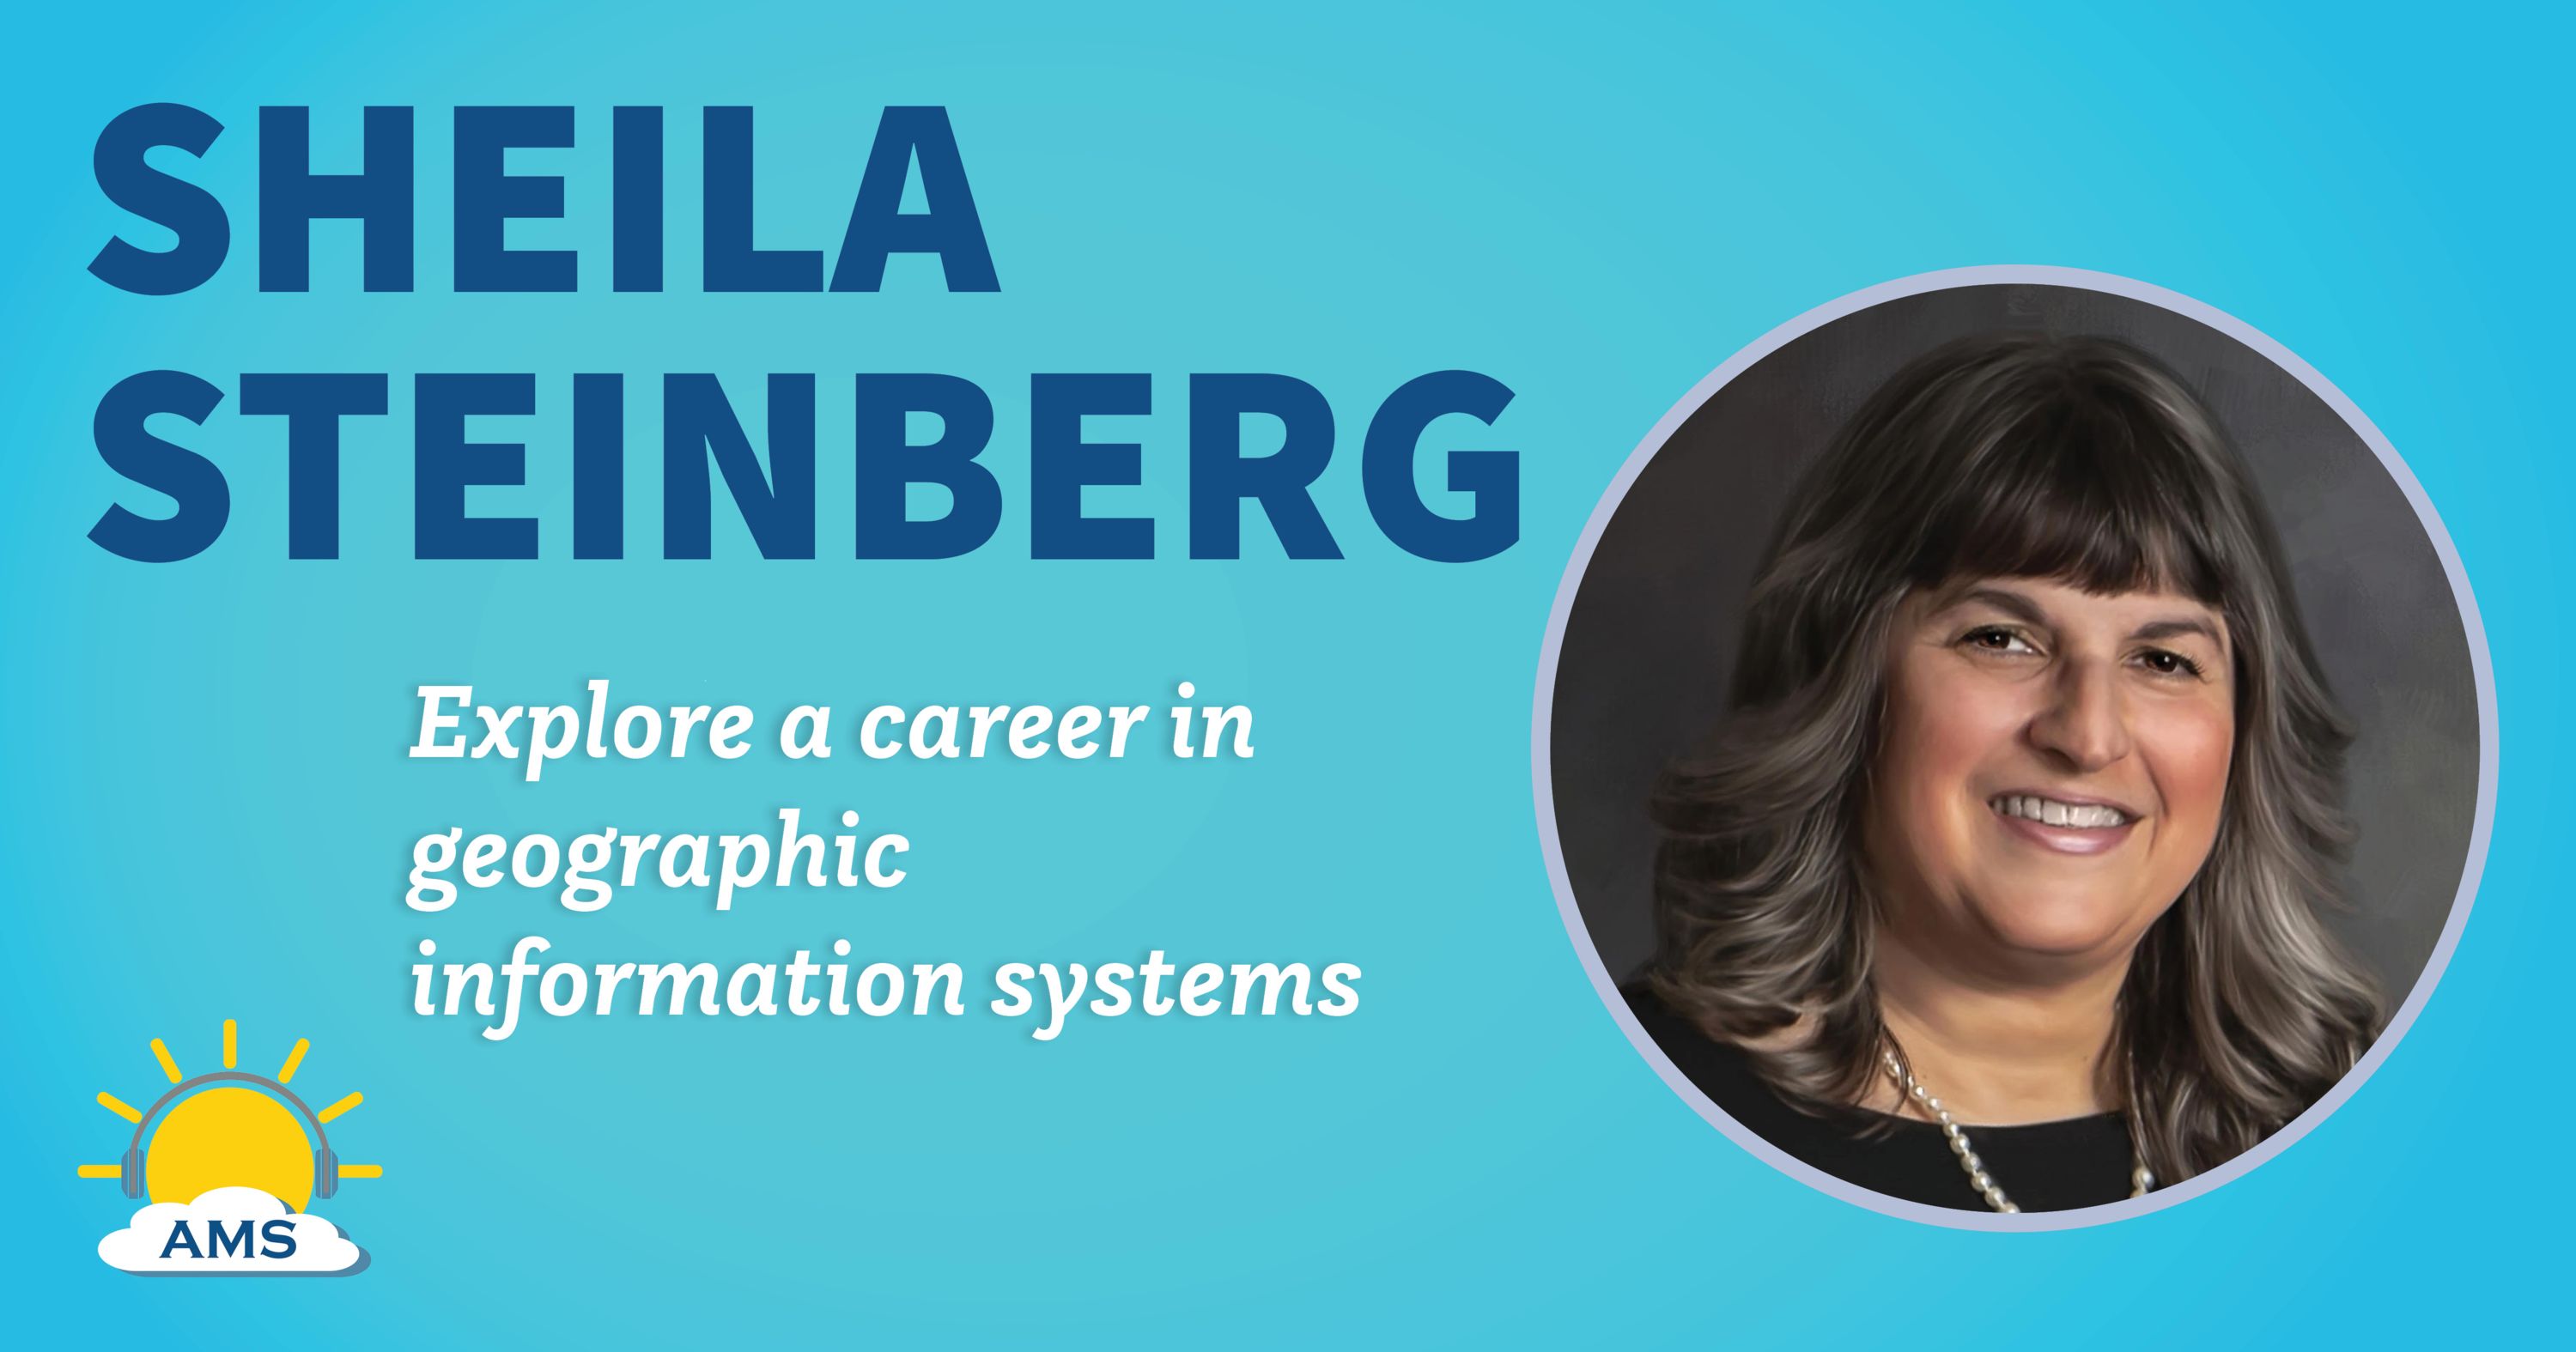 sheila steinberg headshot graphic with teaser text that reads &quotexplore a career in geographic information systems"